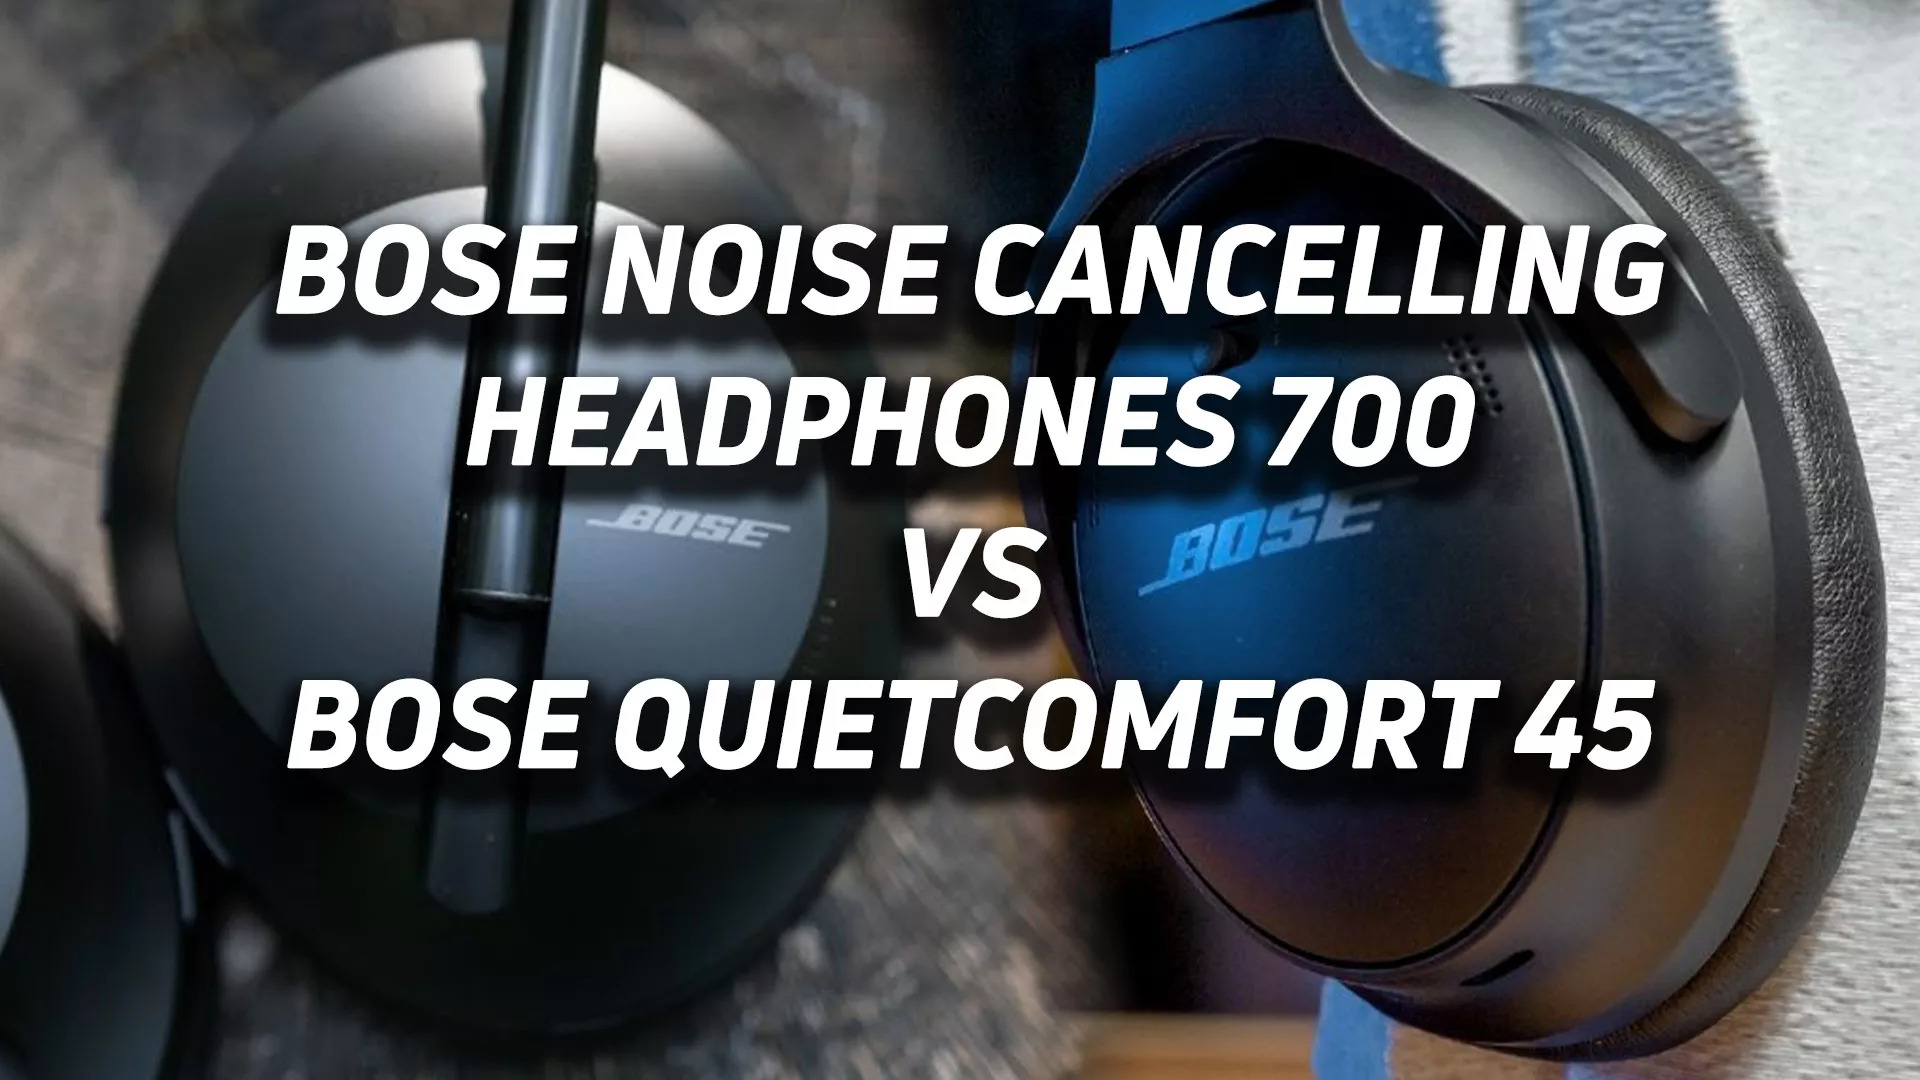 Text reading 'Bose Noise Canceling Headphones 700 vs Bose Quietcomfort 45' overlaid on top of an ear cup of those two models of headphones arranged from left to right.